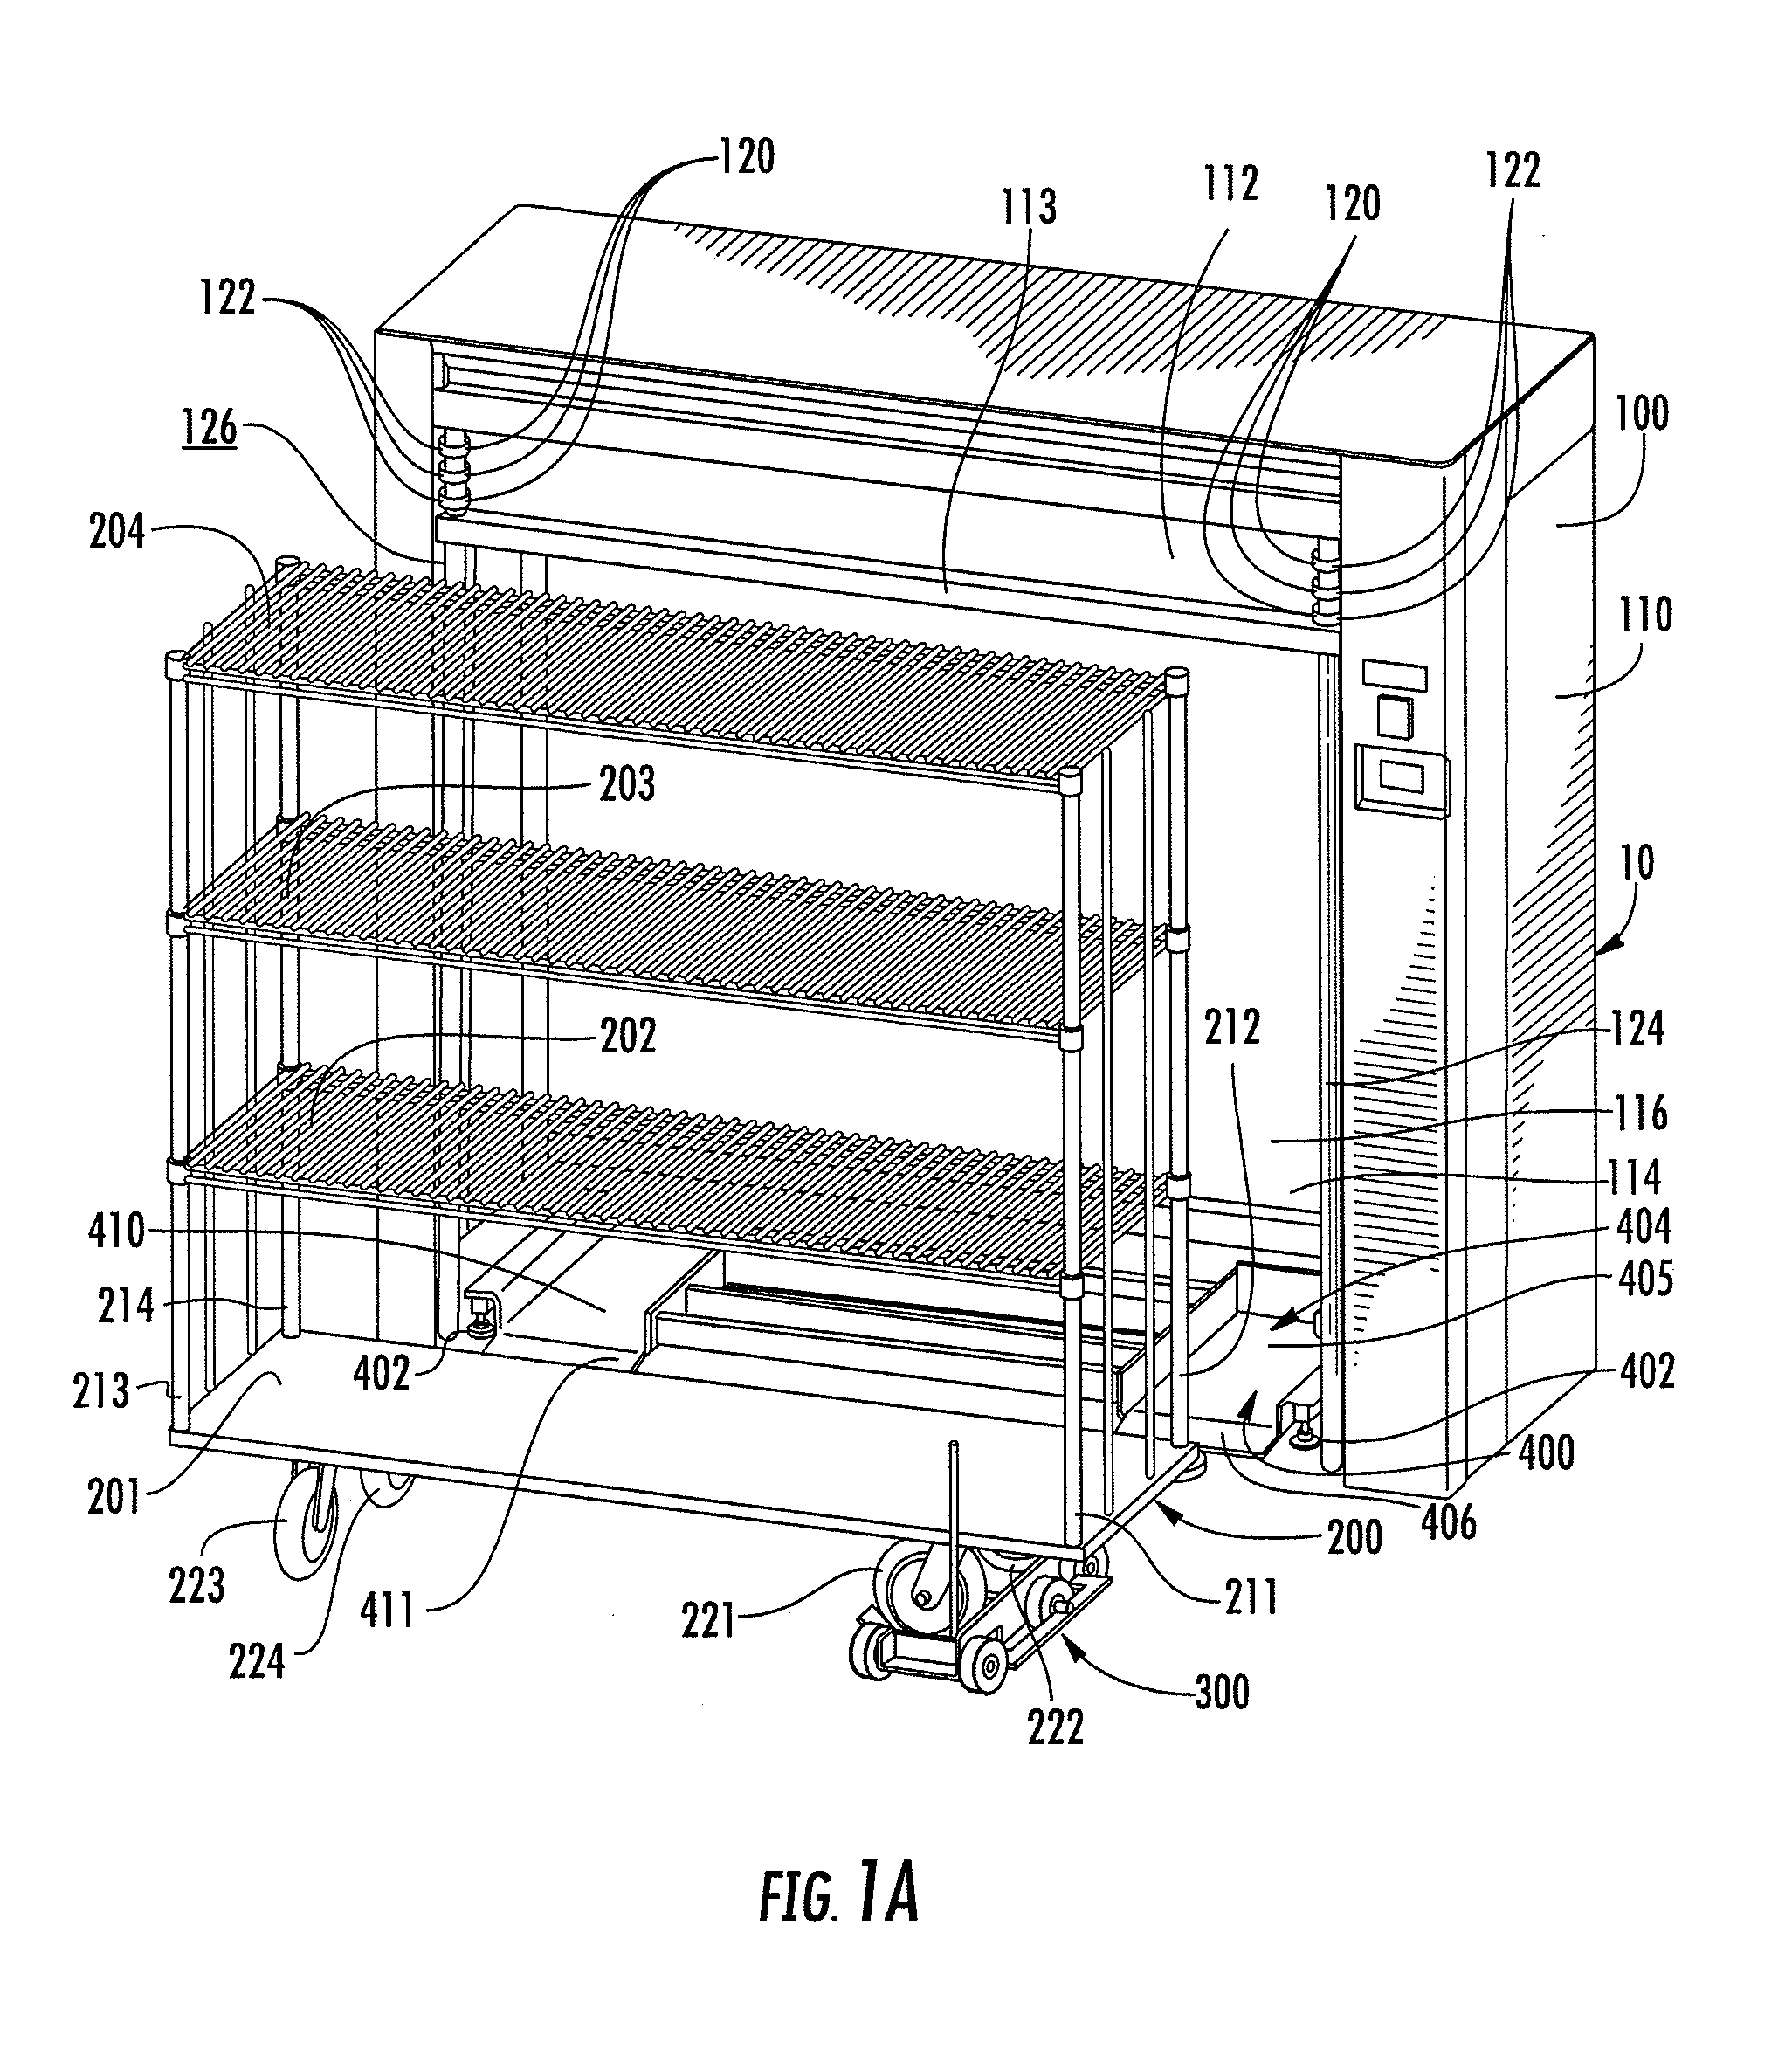 Guides and other apparatus for inserting a cart, such as a cart with one or more fixed wheels, into an enclosure